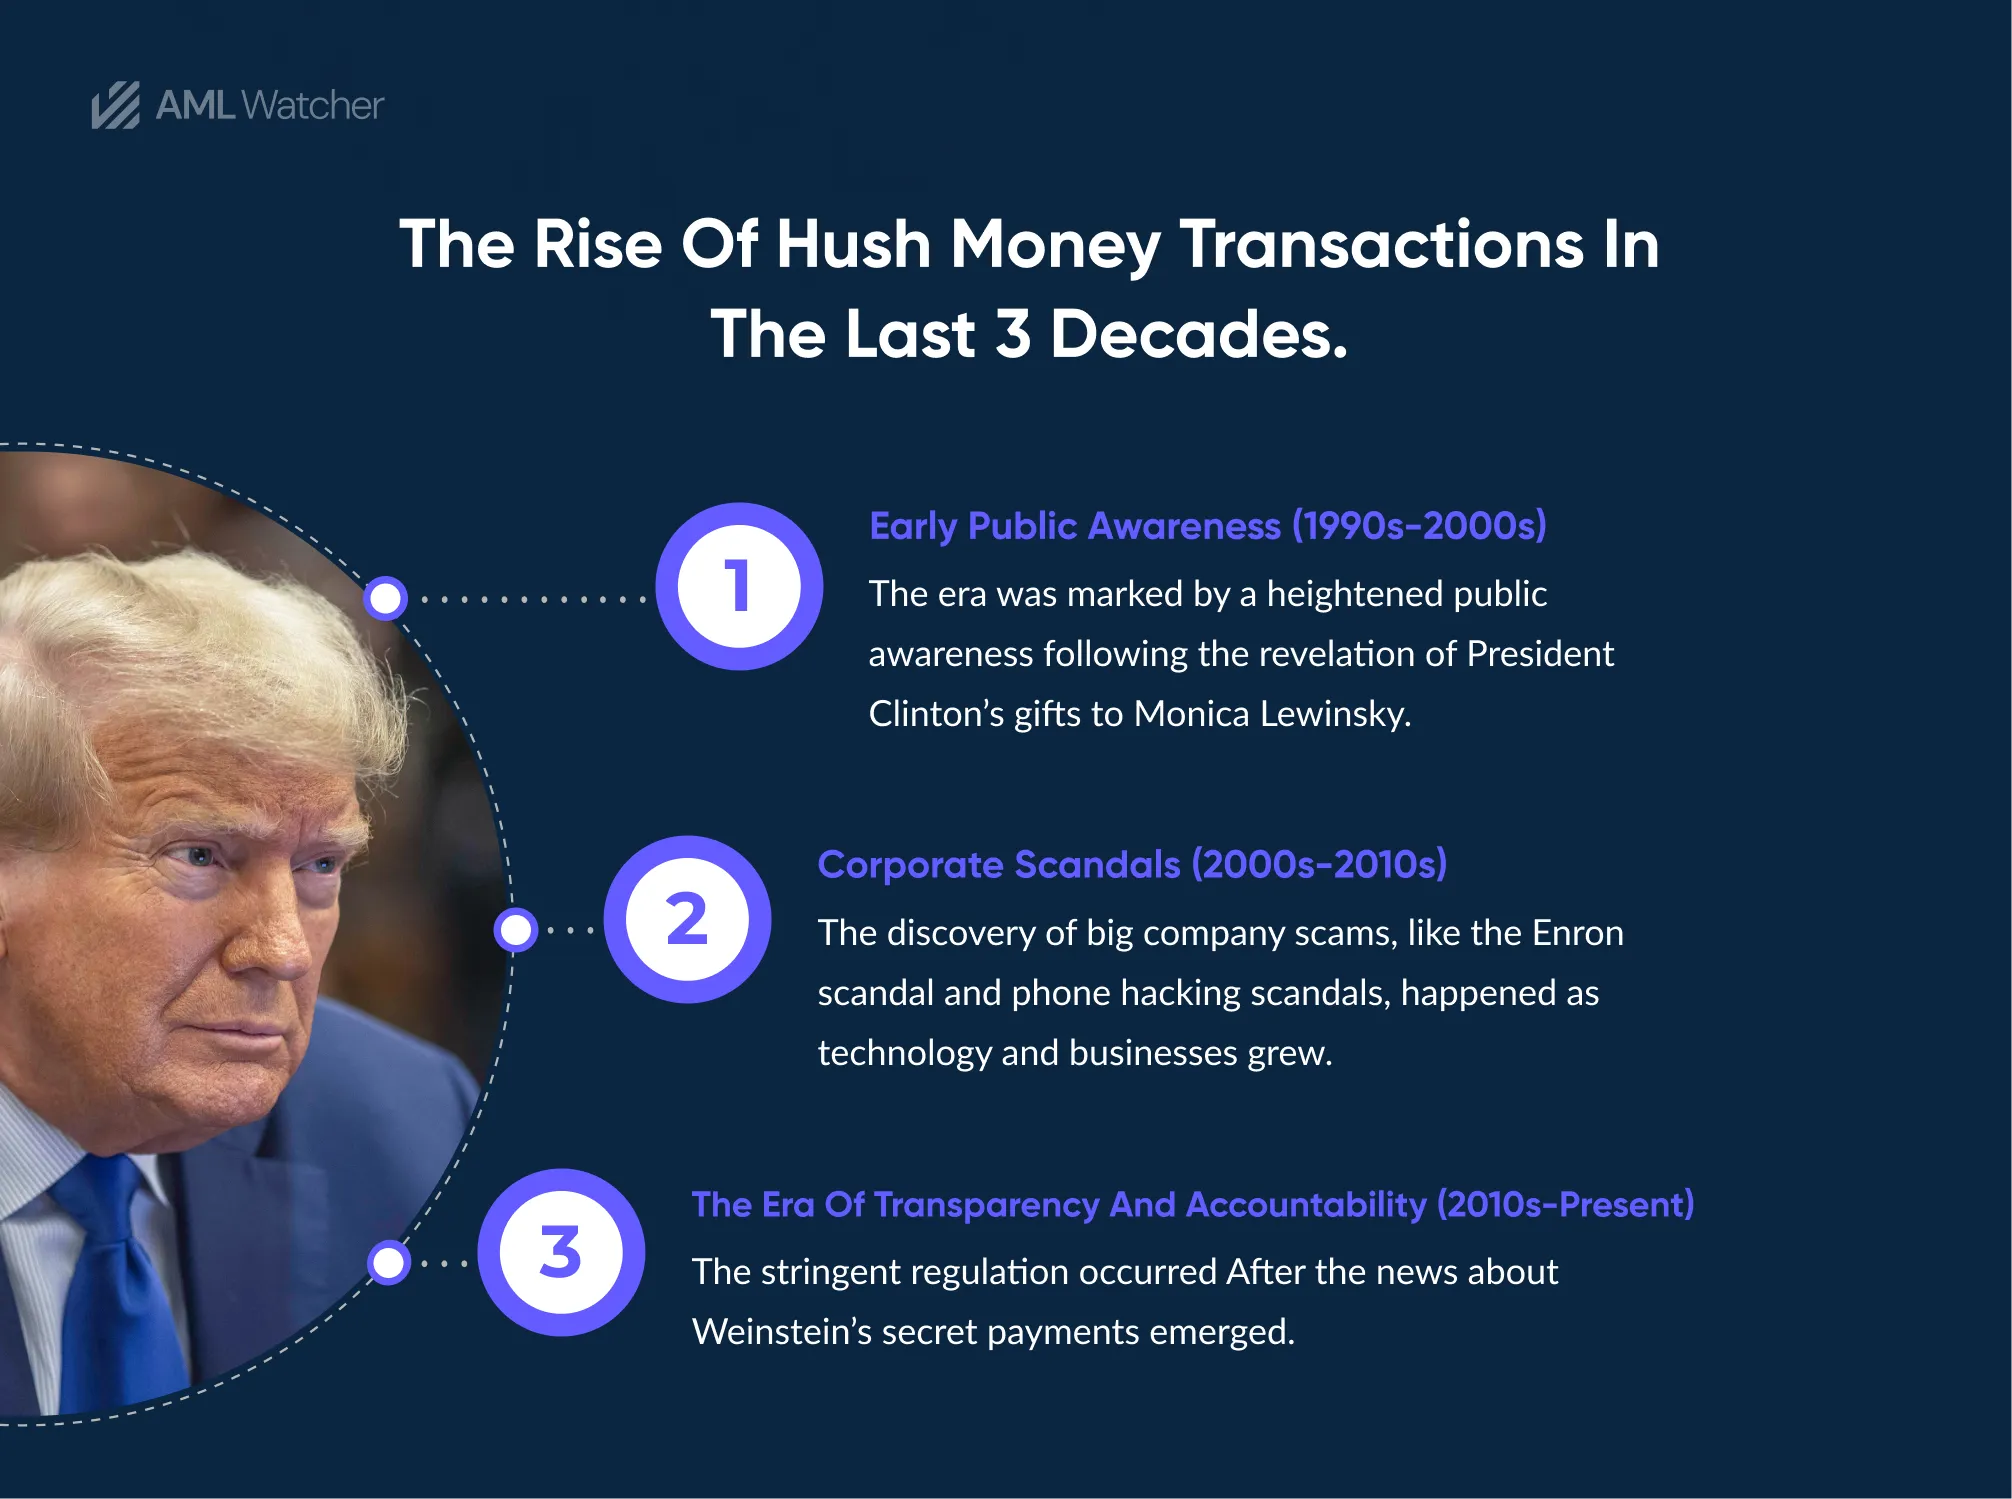 The image shows the evolution of hush money in the last 3 decades.